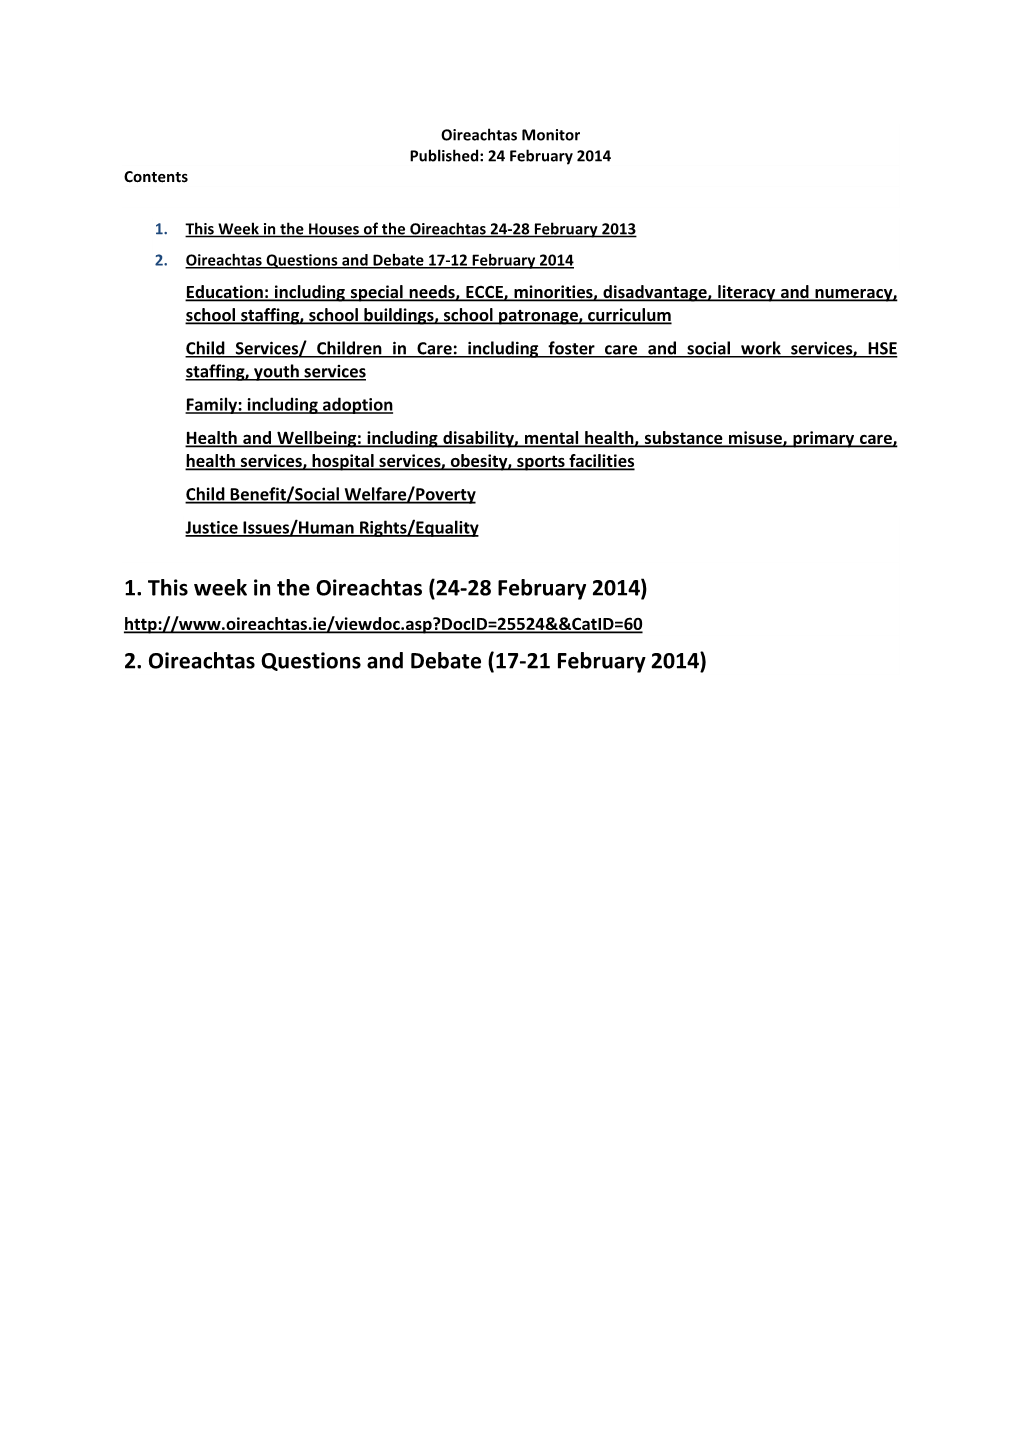 1. This Week in the Oireachtas (24-28 February 2014) 2